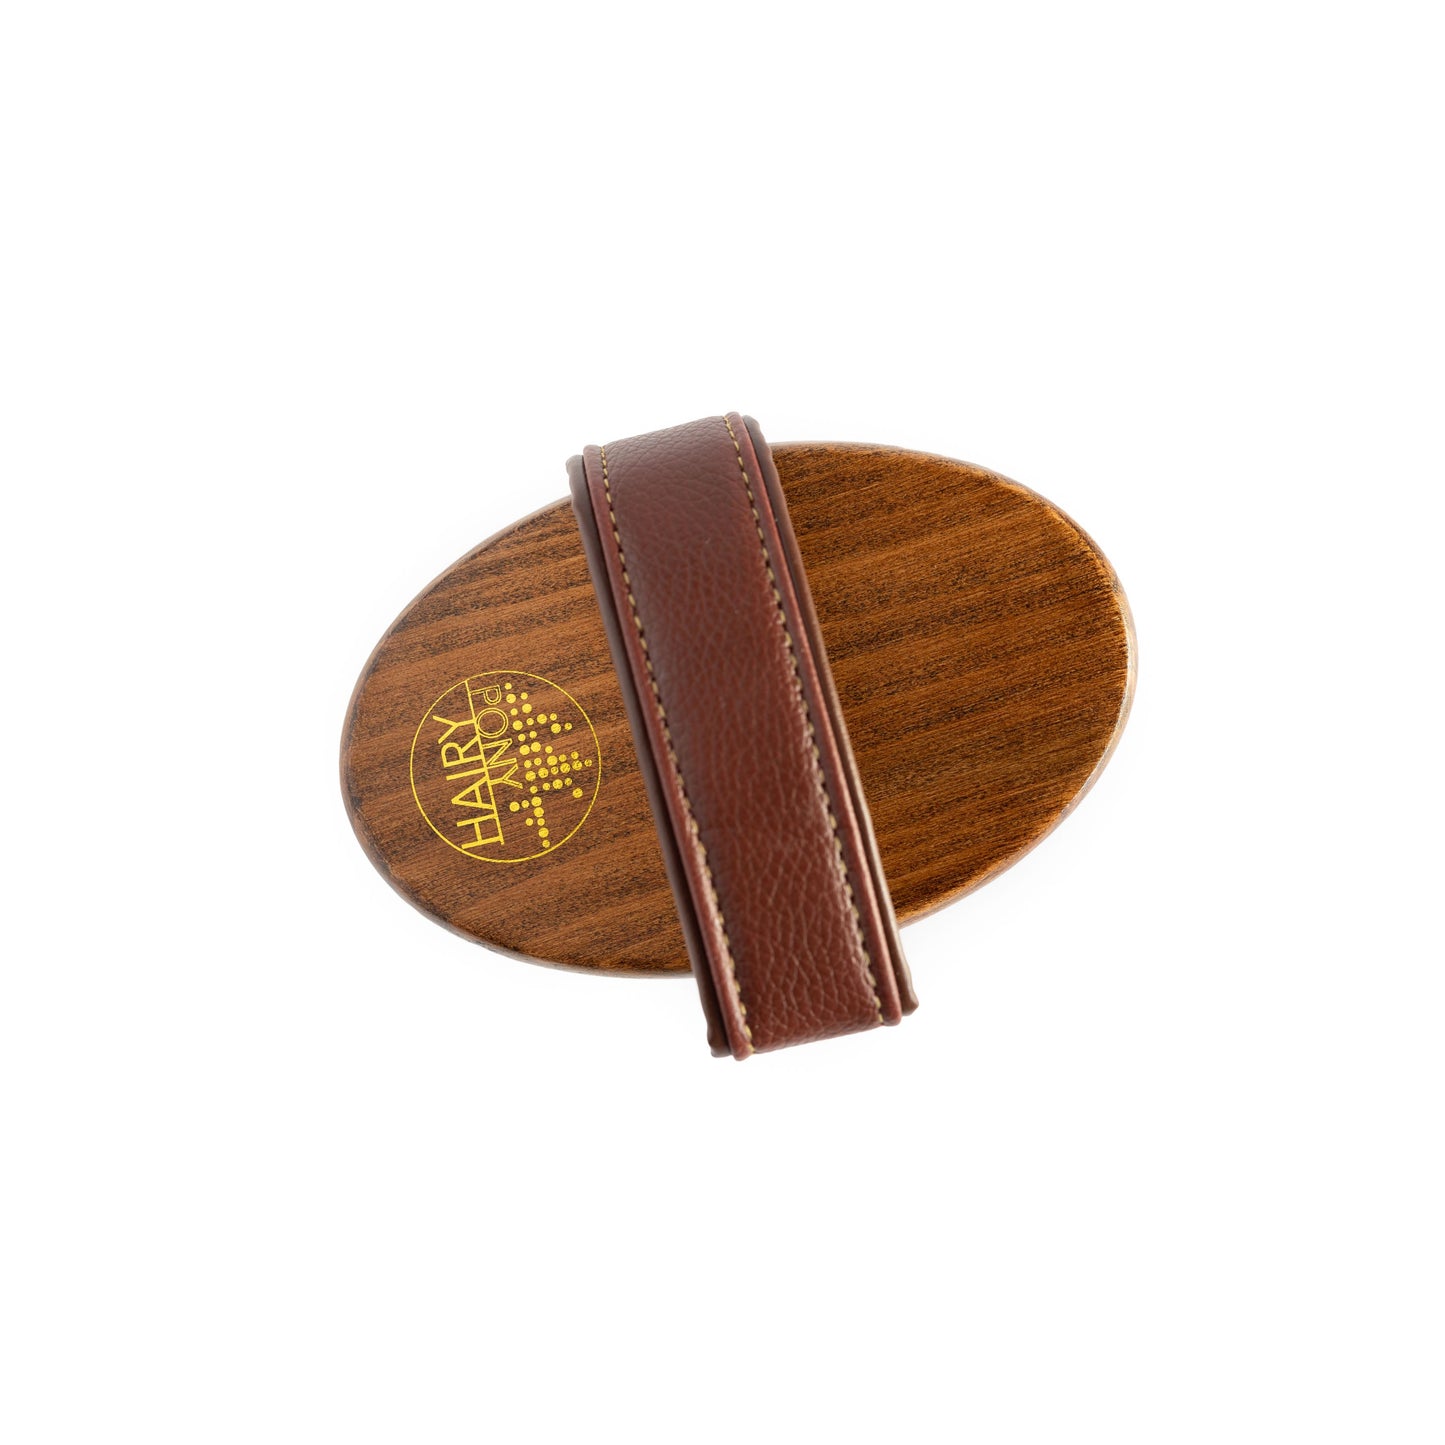 A top view of the Hairy Pony Rubber Brush, showing the beechwood material, soft handle and gold logo detailing.  